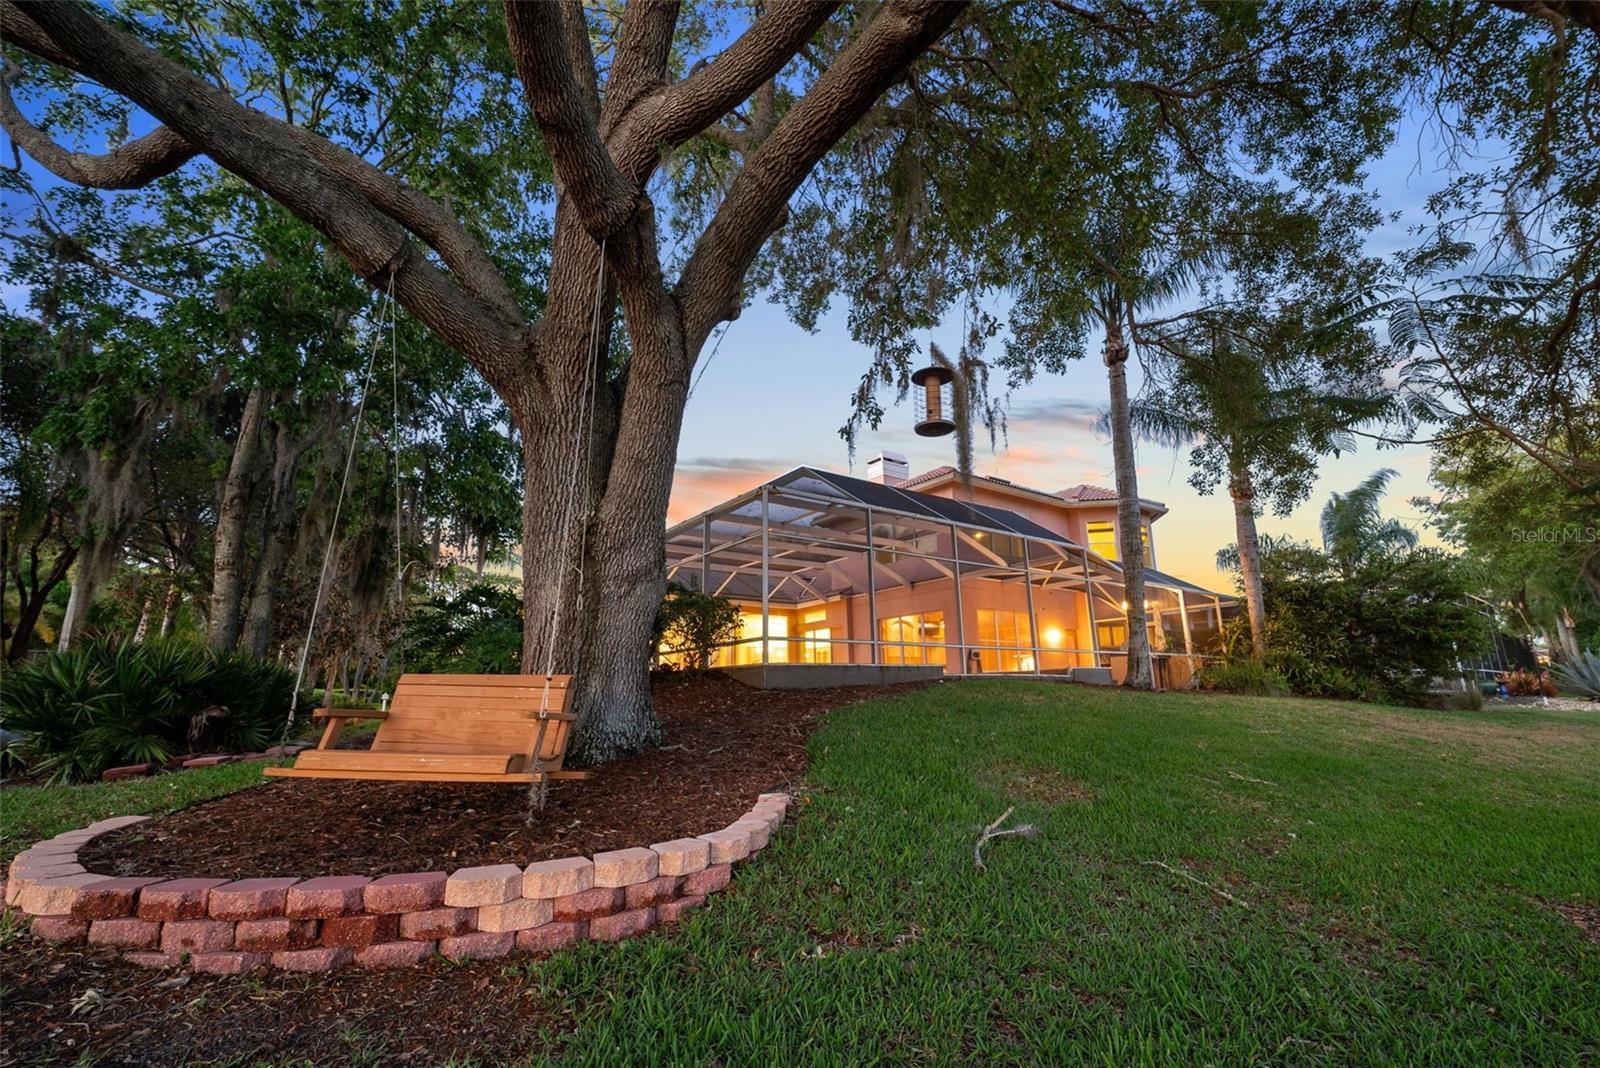 View of the swing and back of the home at sunset